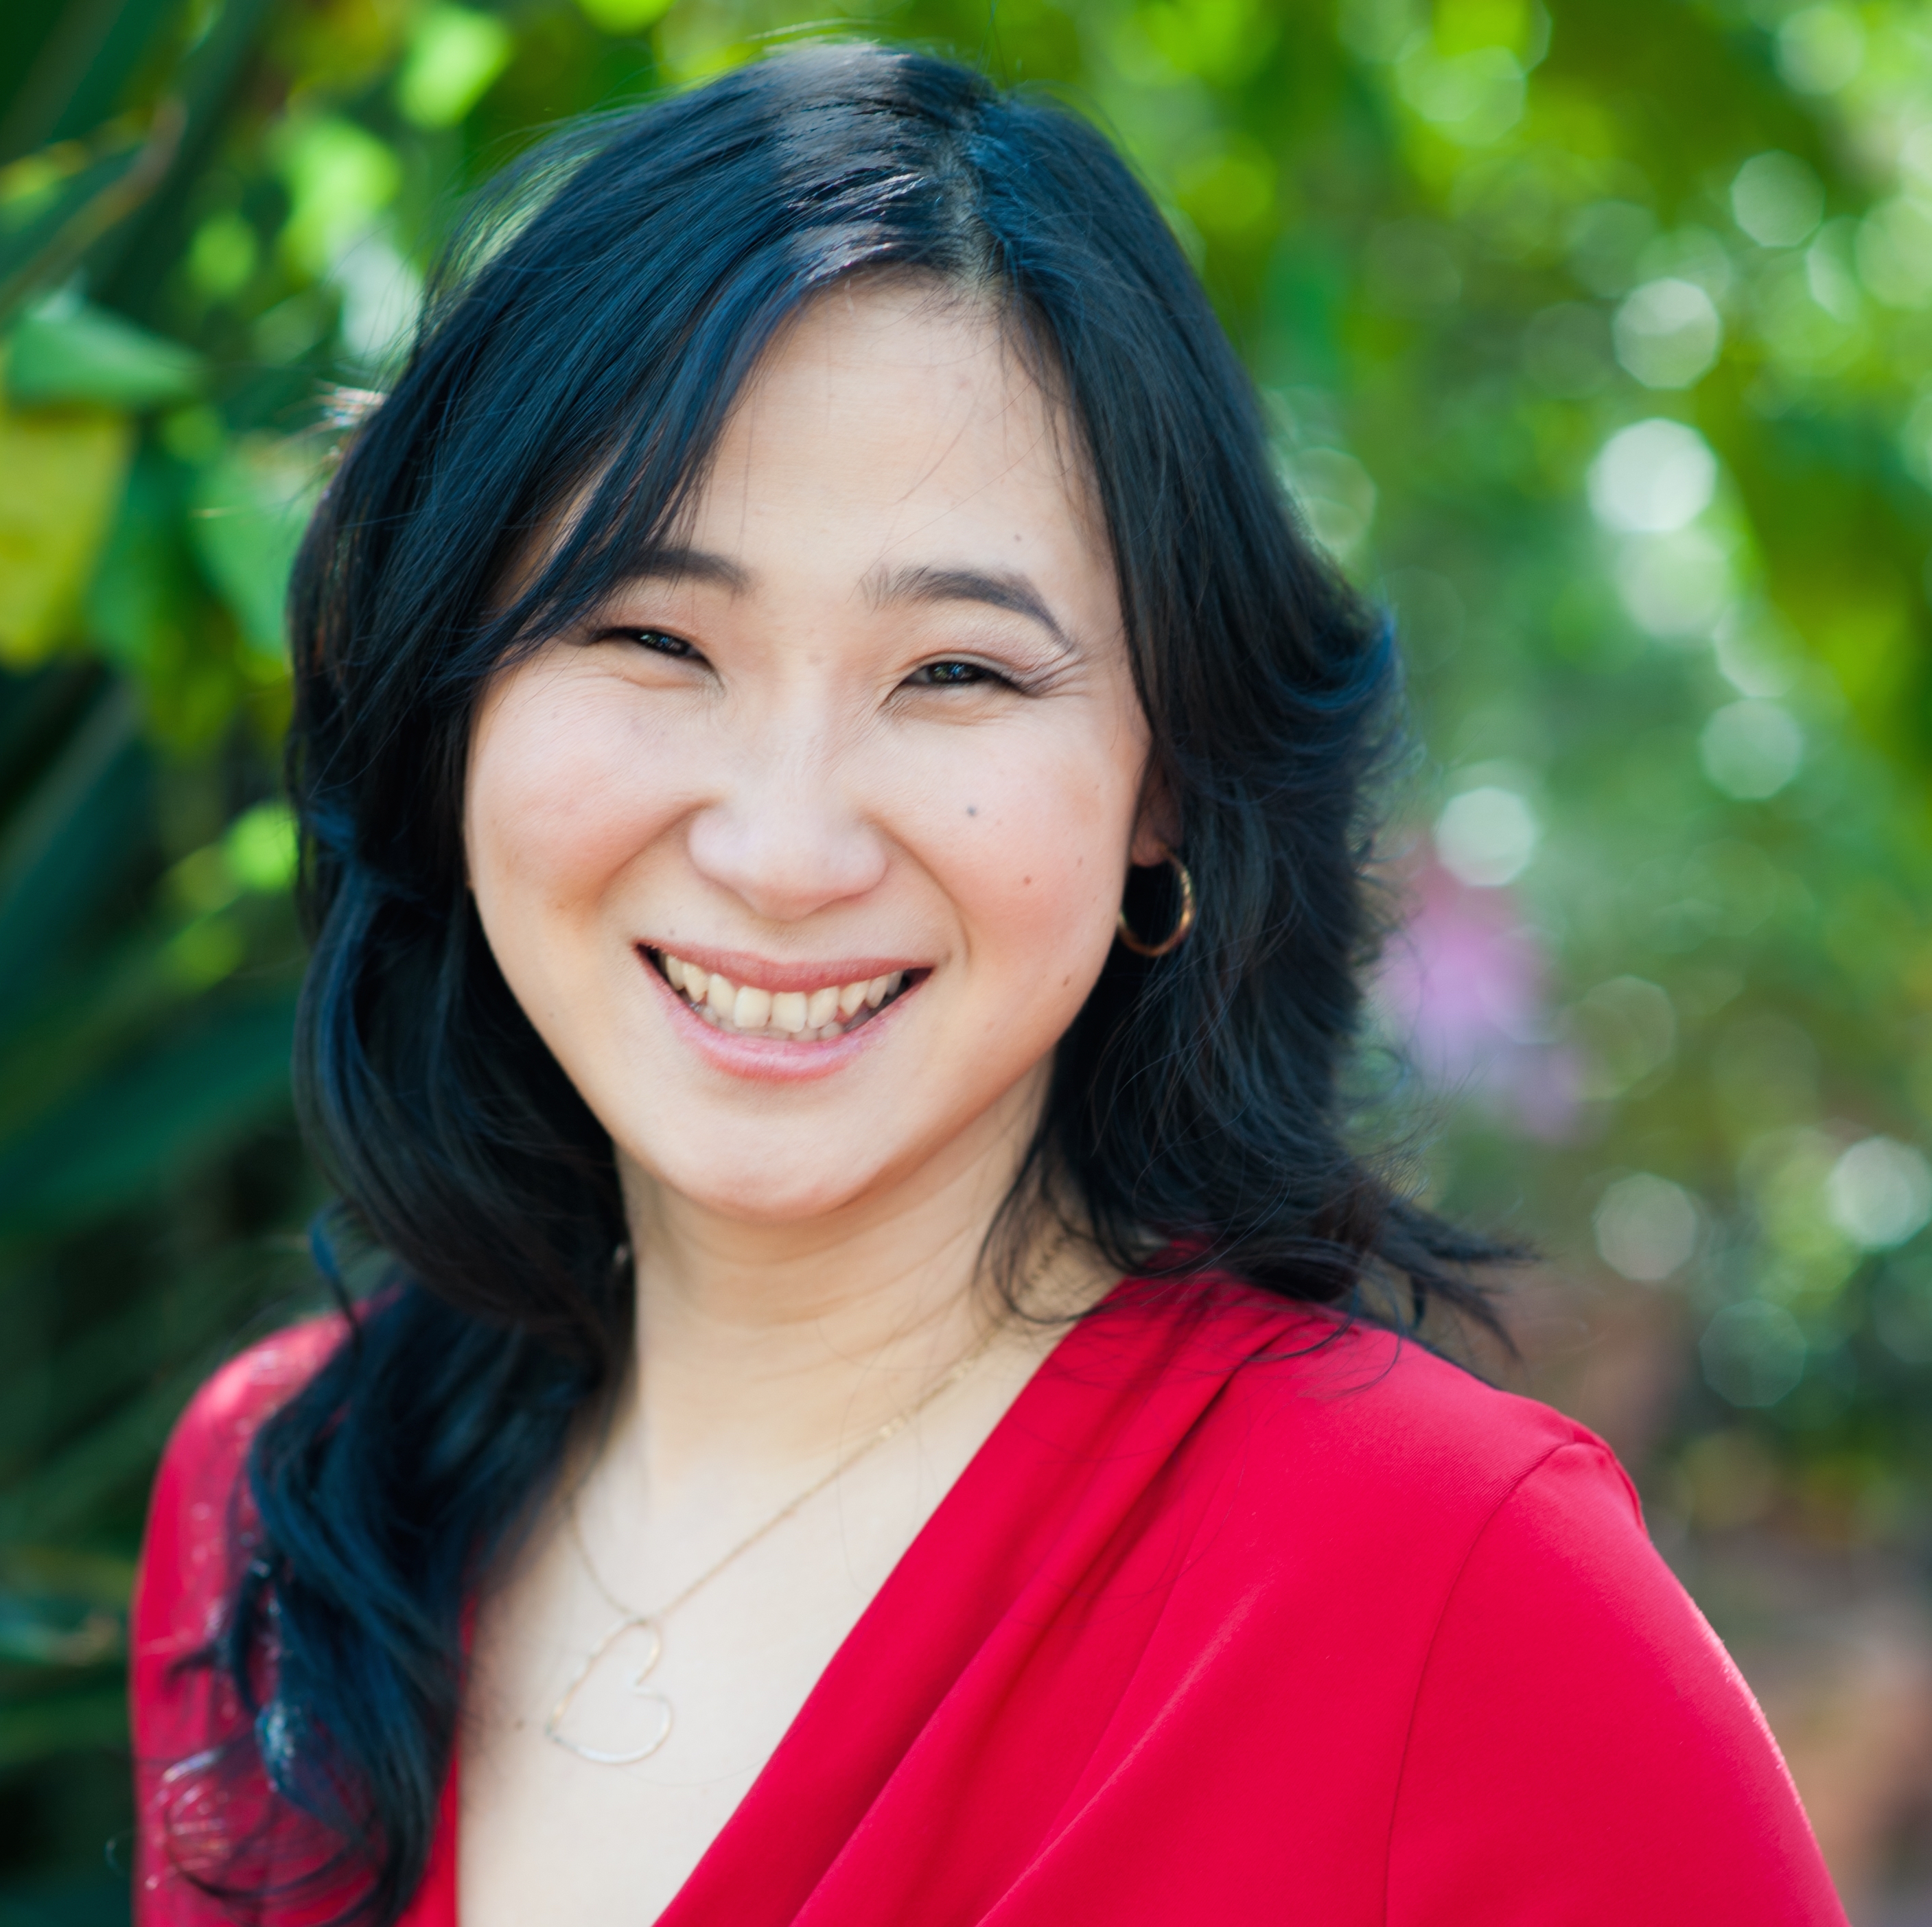 Byttehandel Sovesal bilag Podcast: Some Nerve with Patty Chang Anker - MA Conference for Women